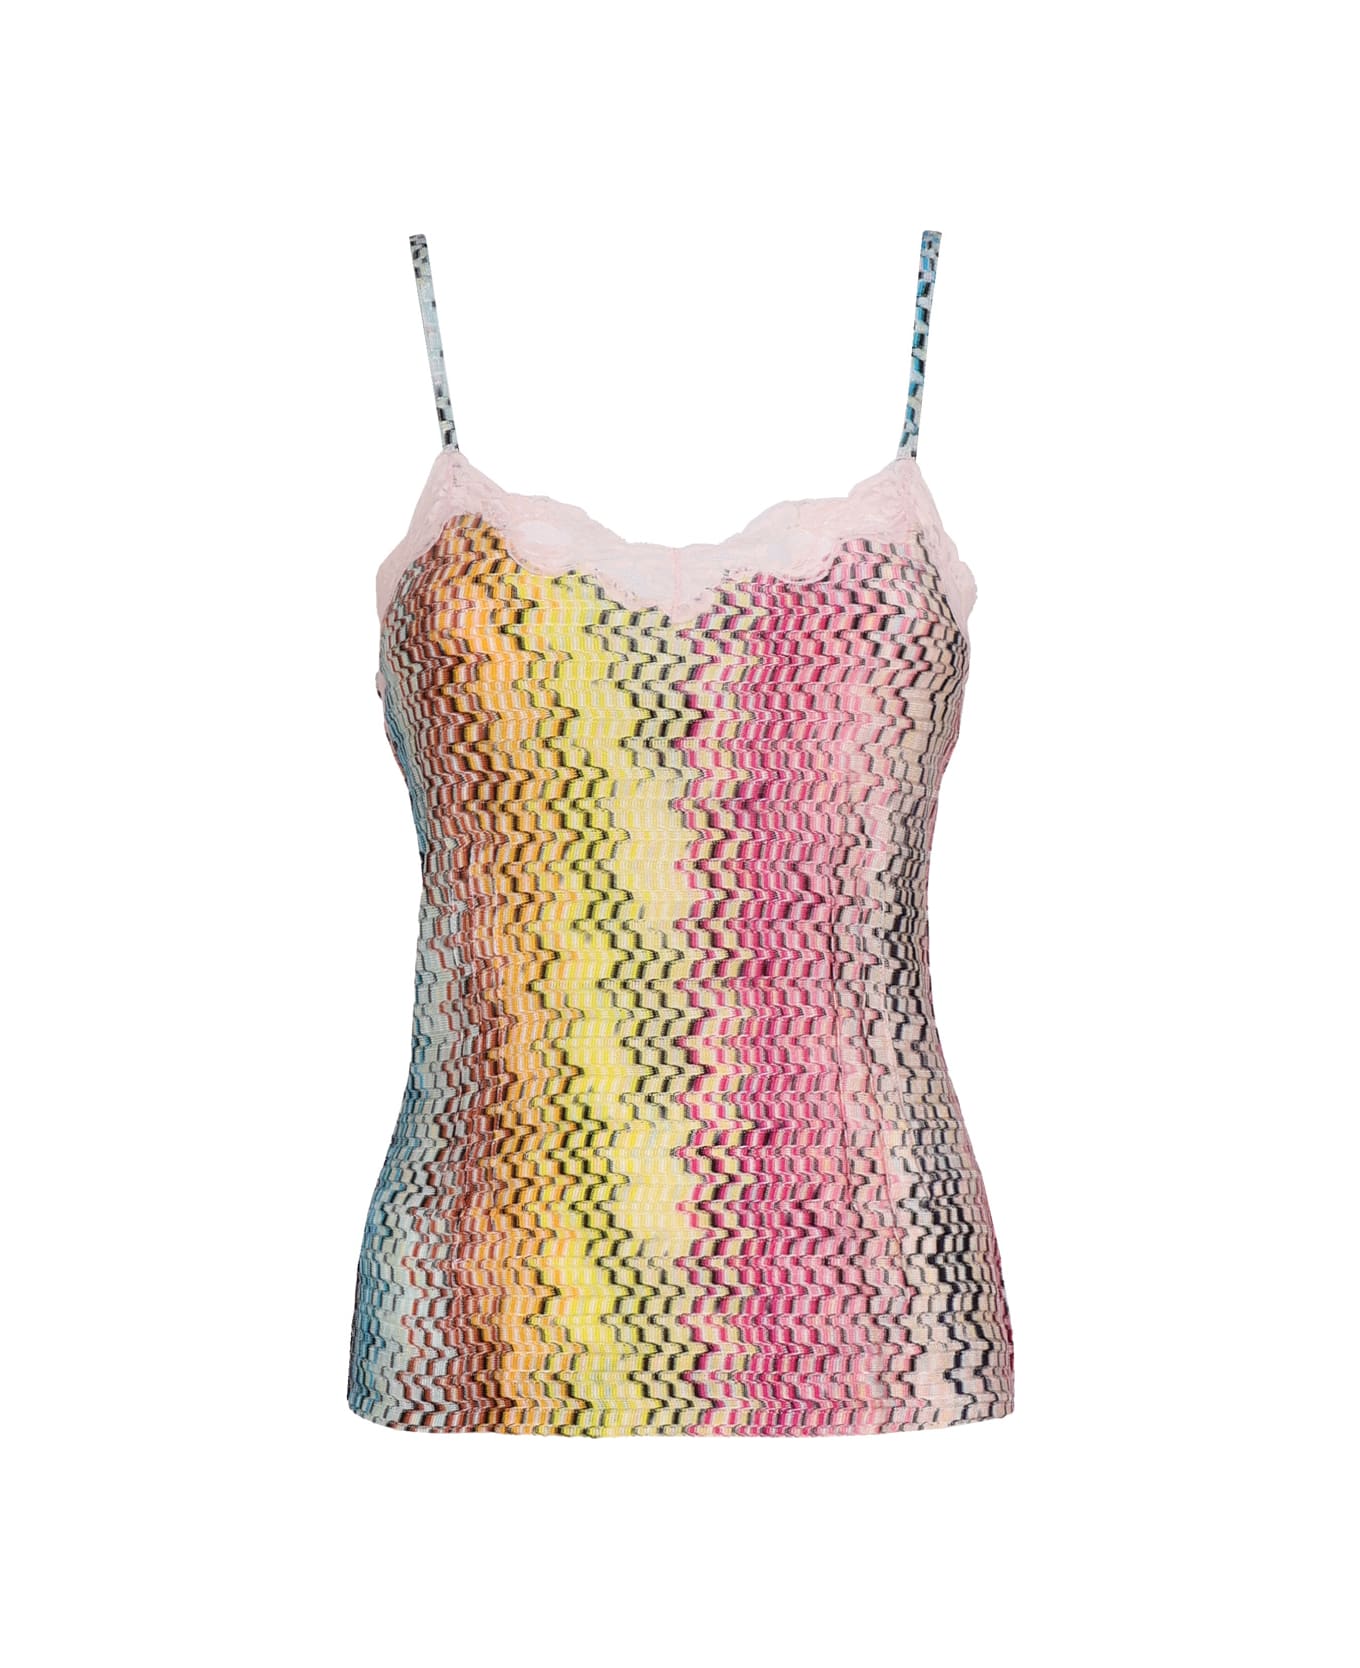 Missoni Top With Thin Straps And Lace Insert - Multicolore キャミソール